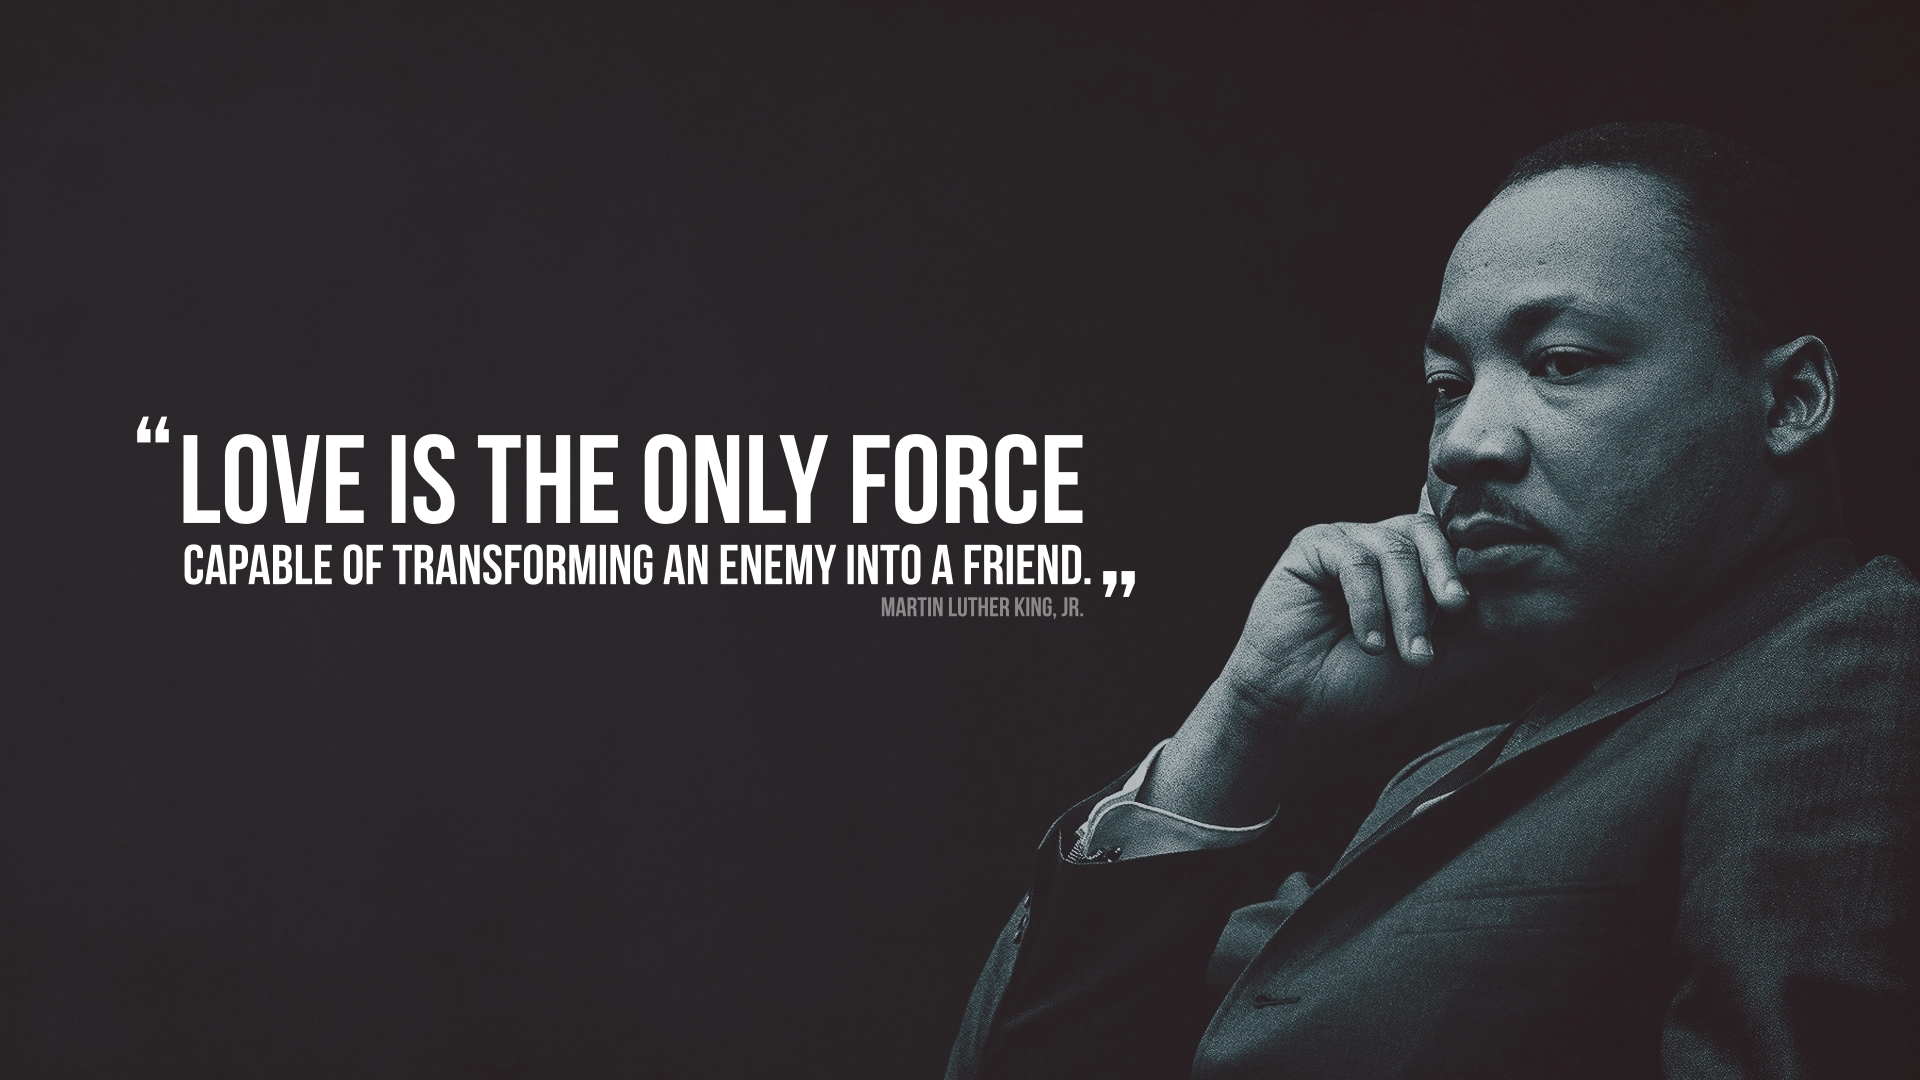 misc, quote, inspirational, martin luther king jr, motivational 1080p